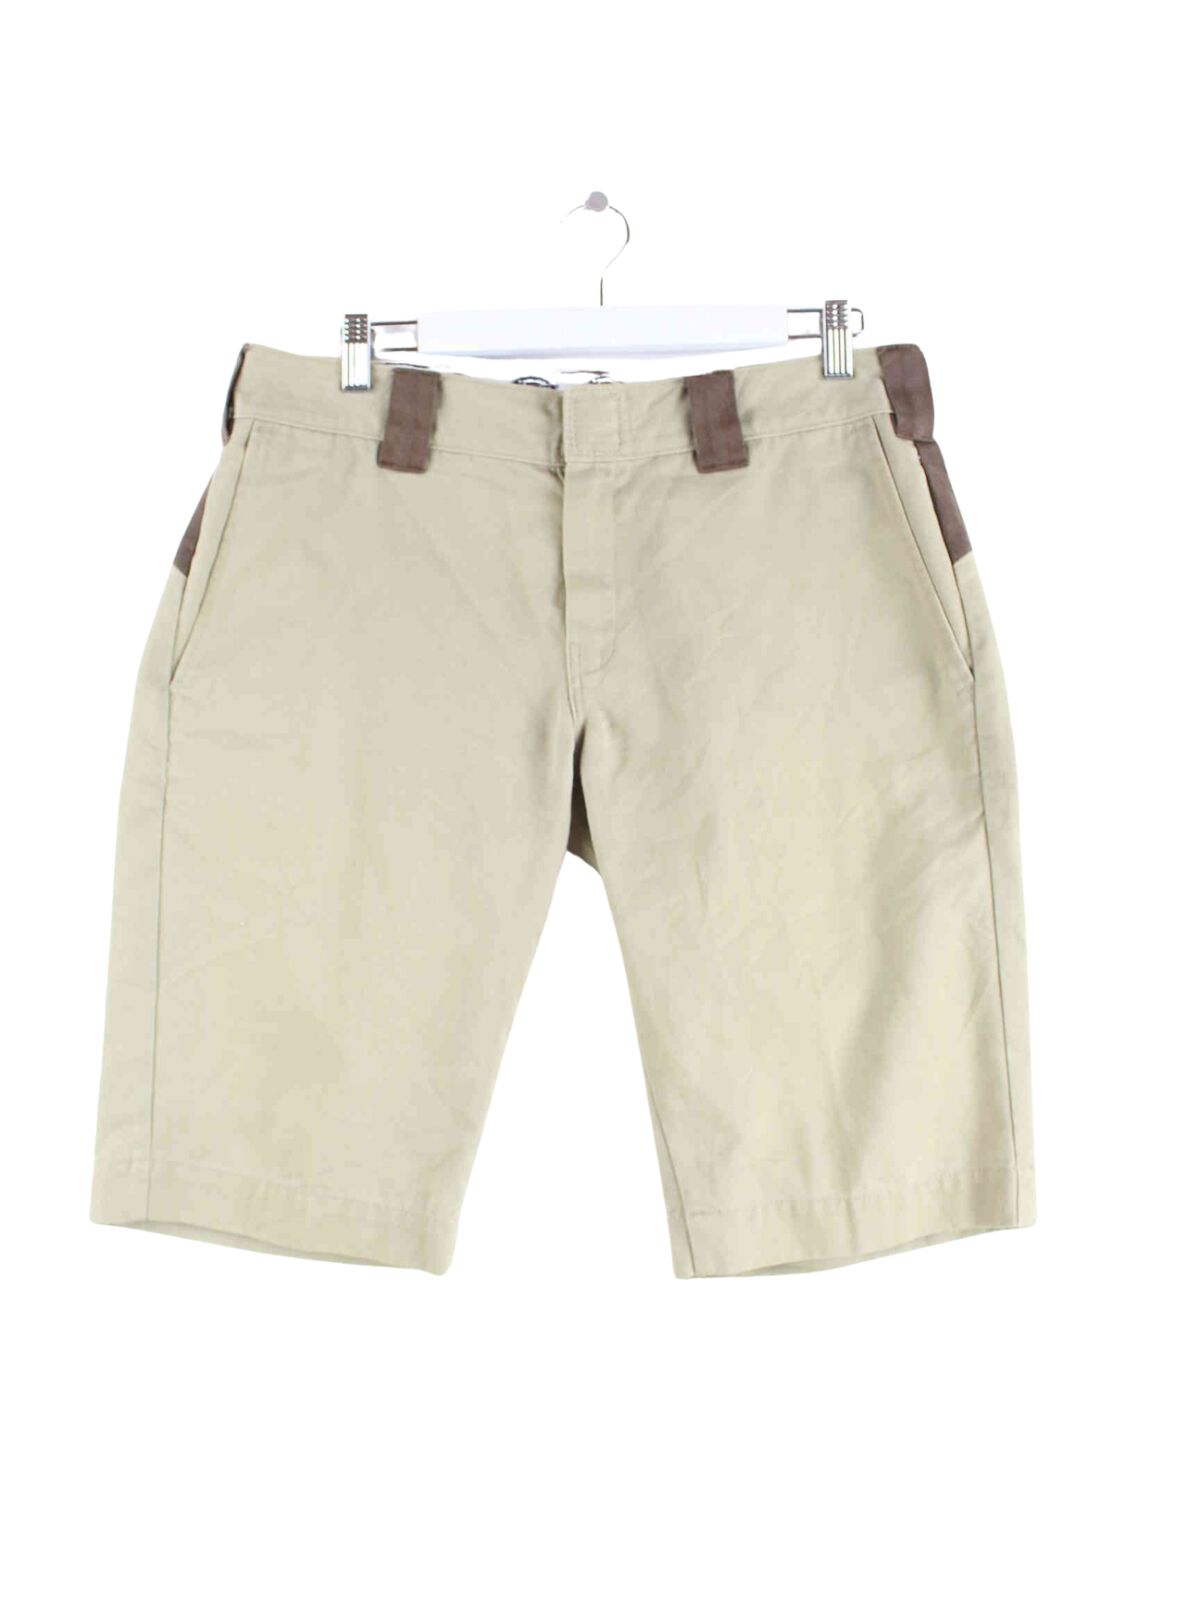 Dickies Chino Shorts Beige W32 (front image)